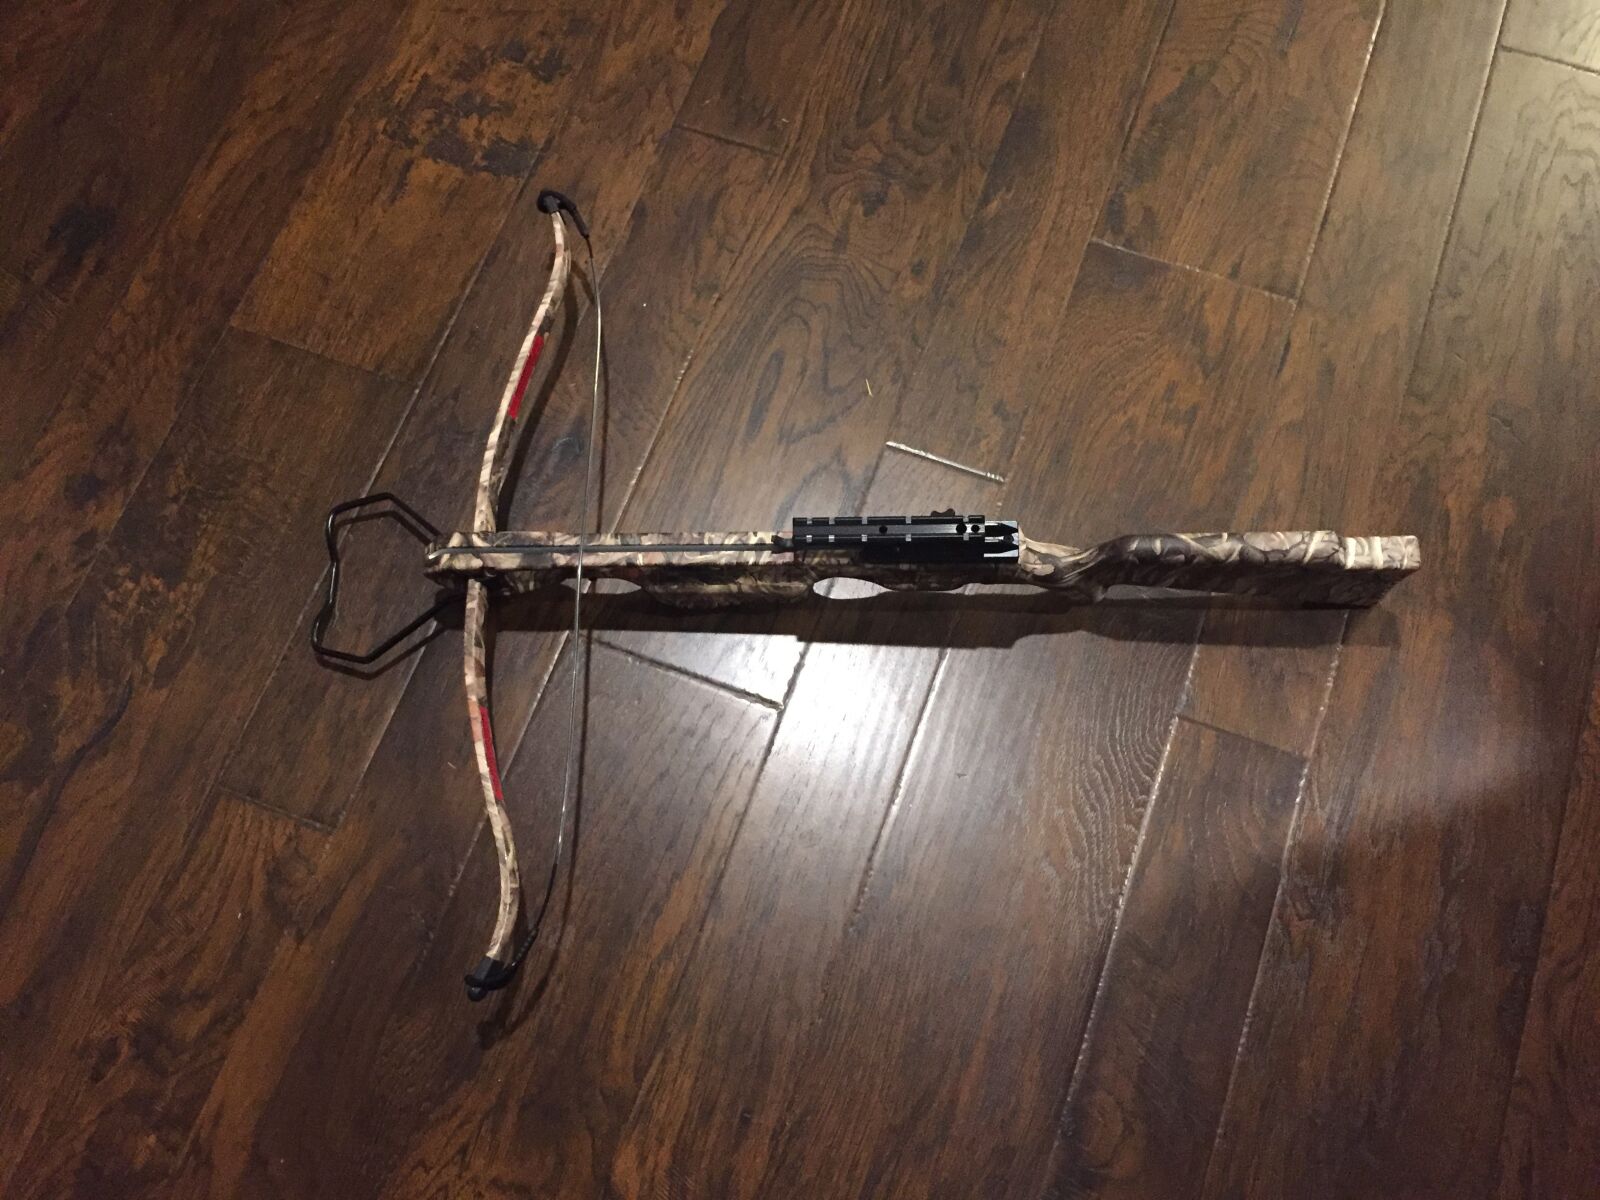 Apple iPhone 6 + iPhone 6 back camera 4.15mm f/2.2 sample photo. Crossbow, assembled, hunting photography